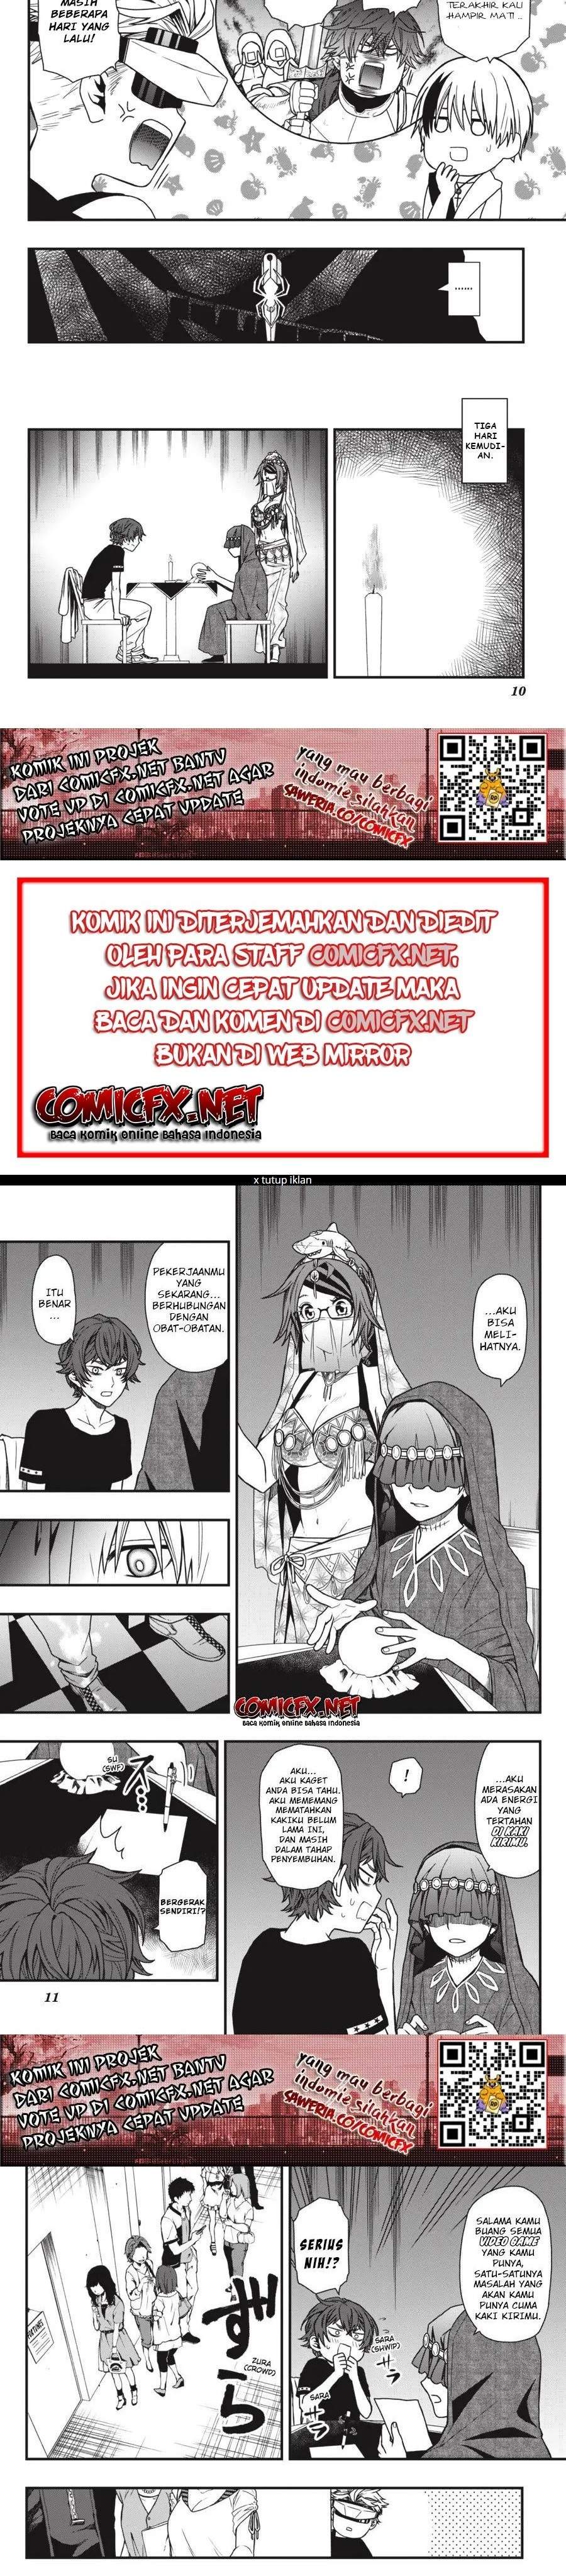 Dead Mount Death Play Chapter 11 Bahasa Indonesia